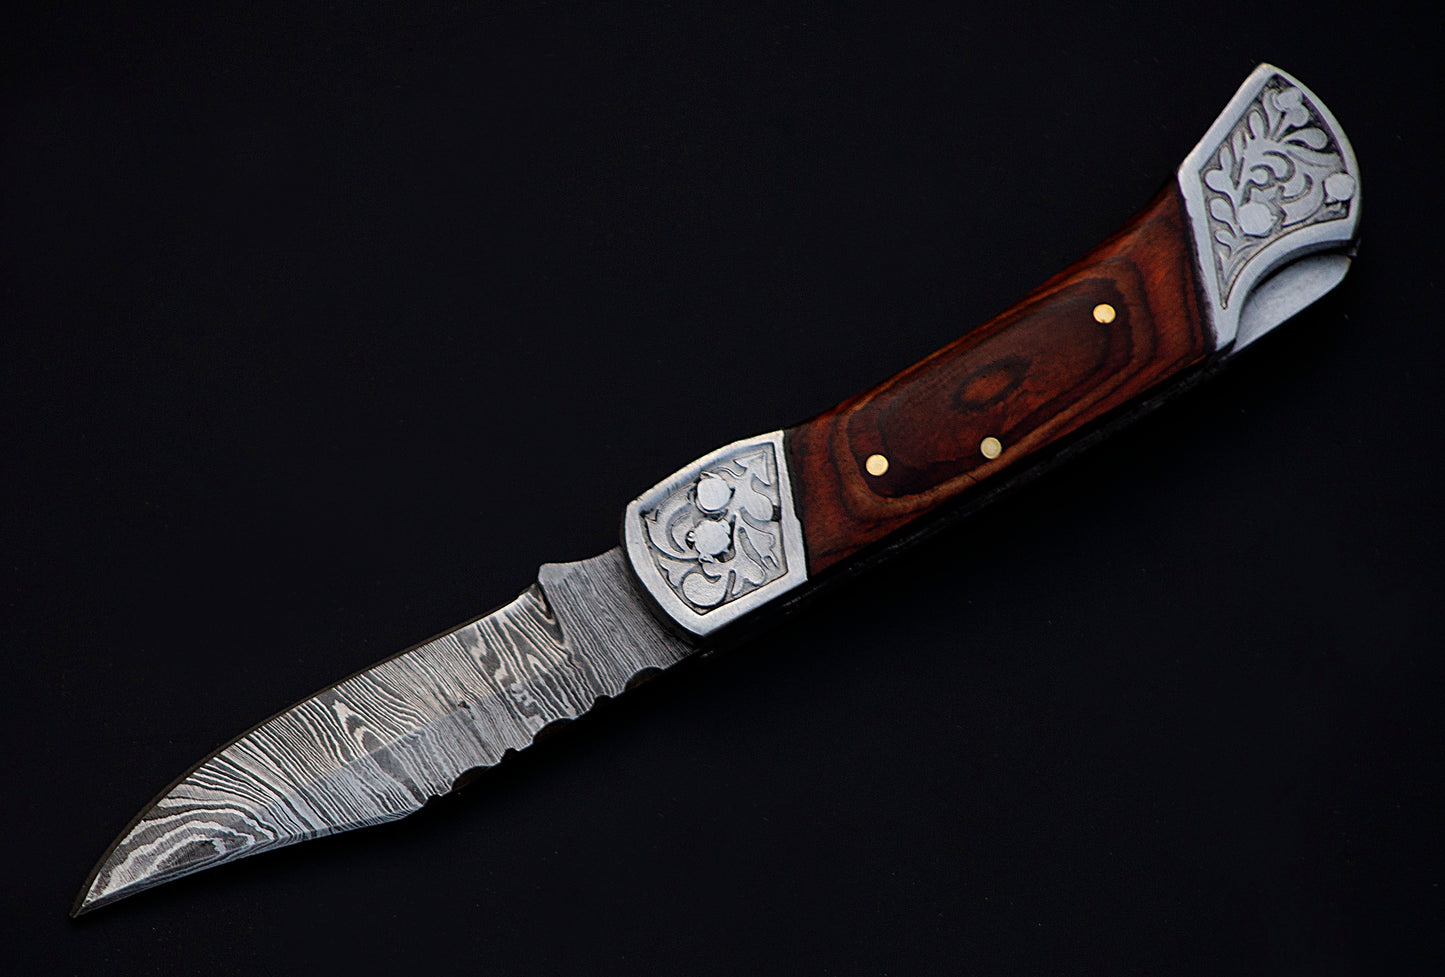 7" long back lock Folding Knife, Rose wood Scale with Engraved steel bolster, custom made 3.25" Hand Forged Damascus steel blade, Cow hide leather sheath with belt loop